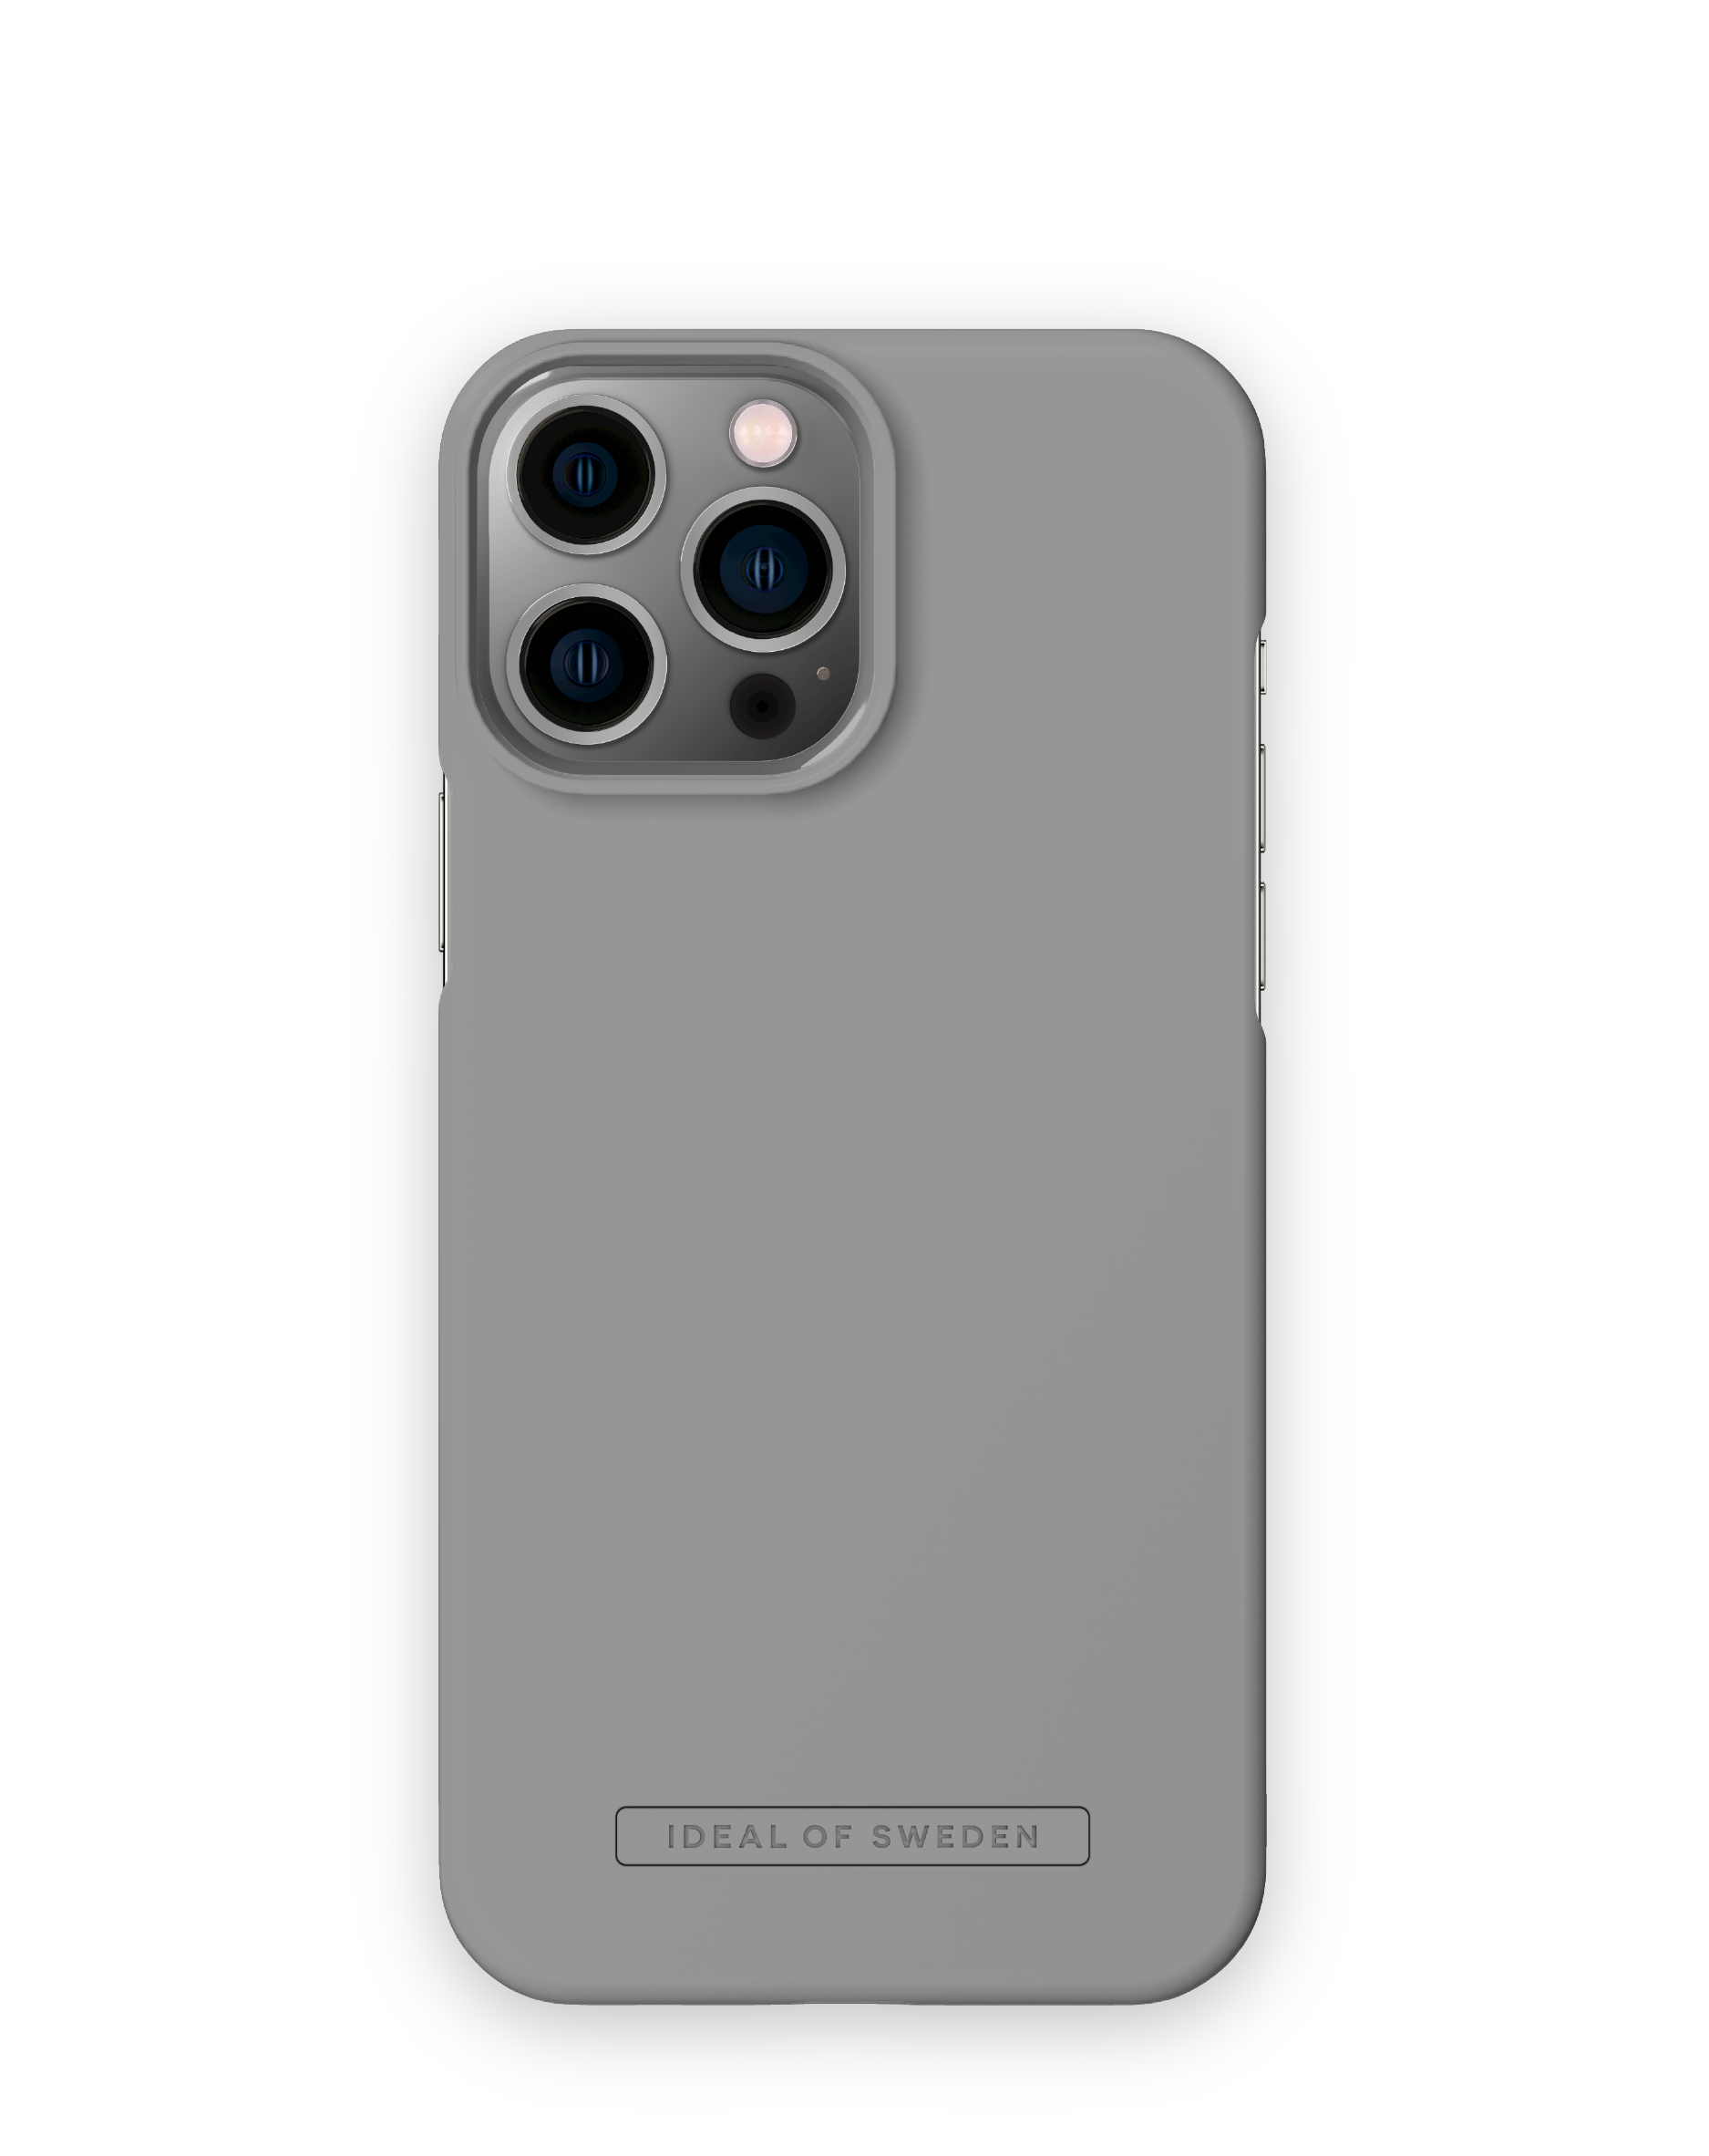 Ash IDFCSS22-I2167-409, 13 Max, Backcover, OF SWEDEN IDEAL Pro Apple, Grey iPhone